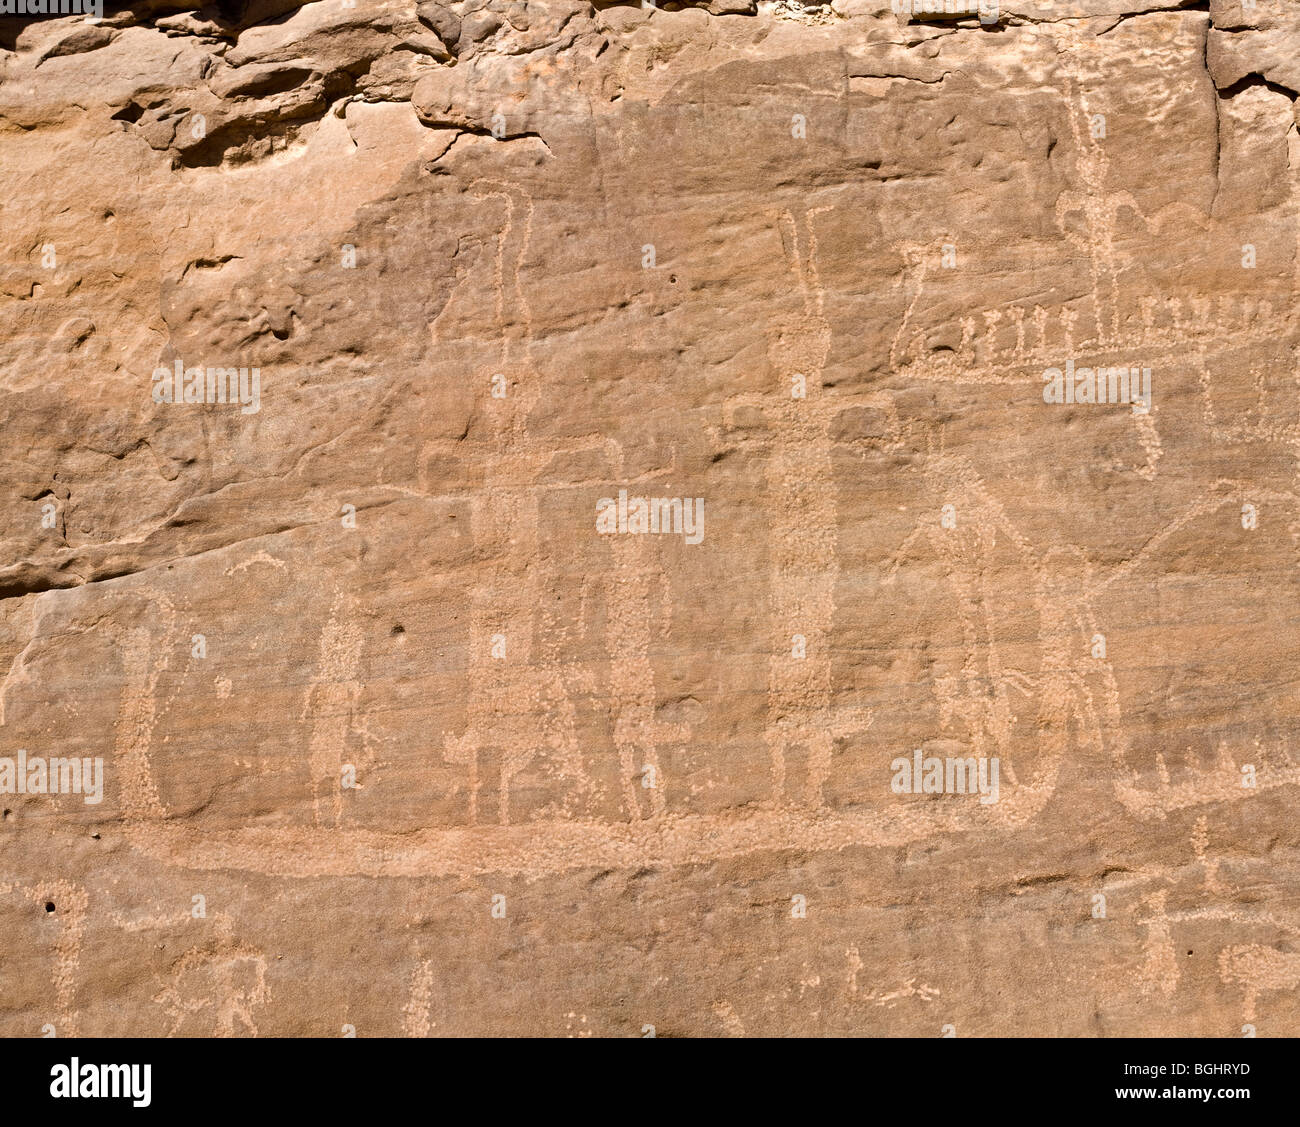 Winklers famous Rock-Art site 26 in Wadi Abu Wasil in the Eastern Desert of Egypt. Stock Photo